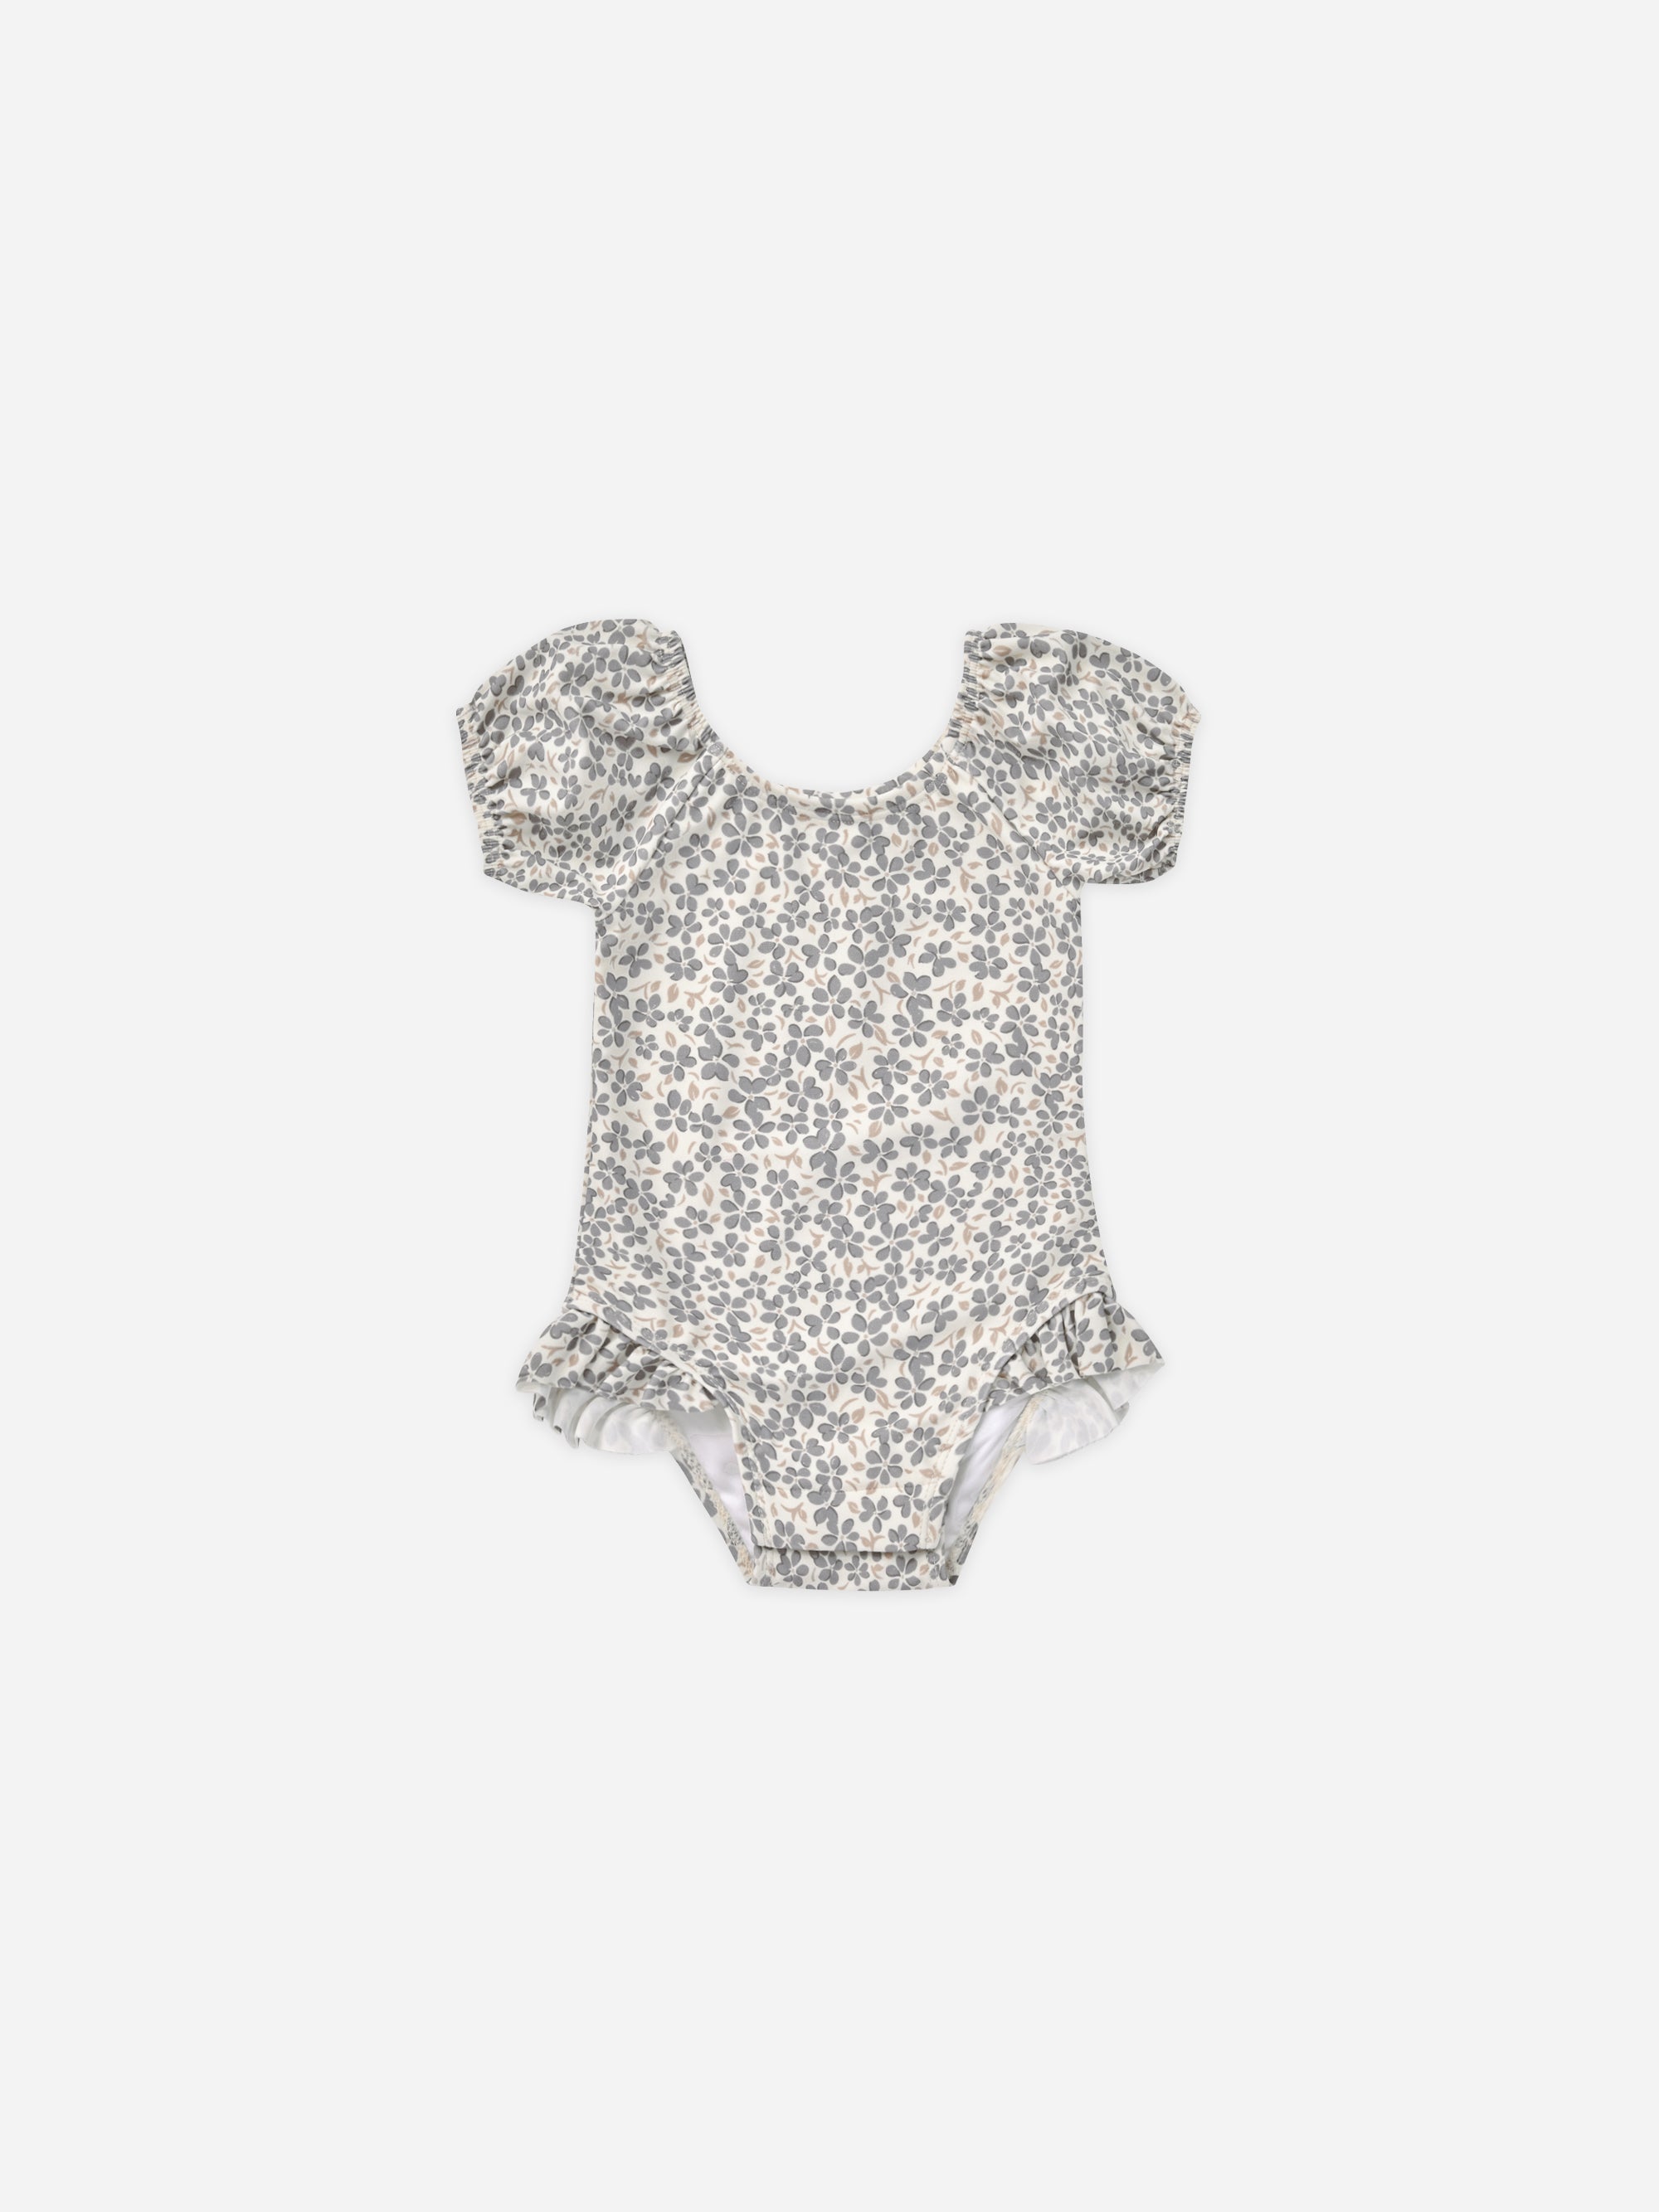 Catalina One-Piece Swimsuit || Poppy - Rylee + Cru | Kids Clothes | Trendy Baby Clothes | Modern Infant Outfits |